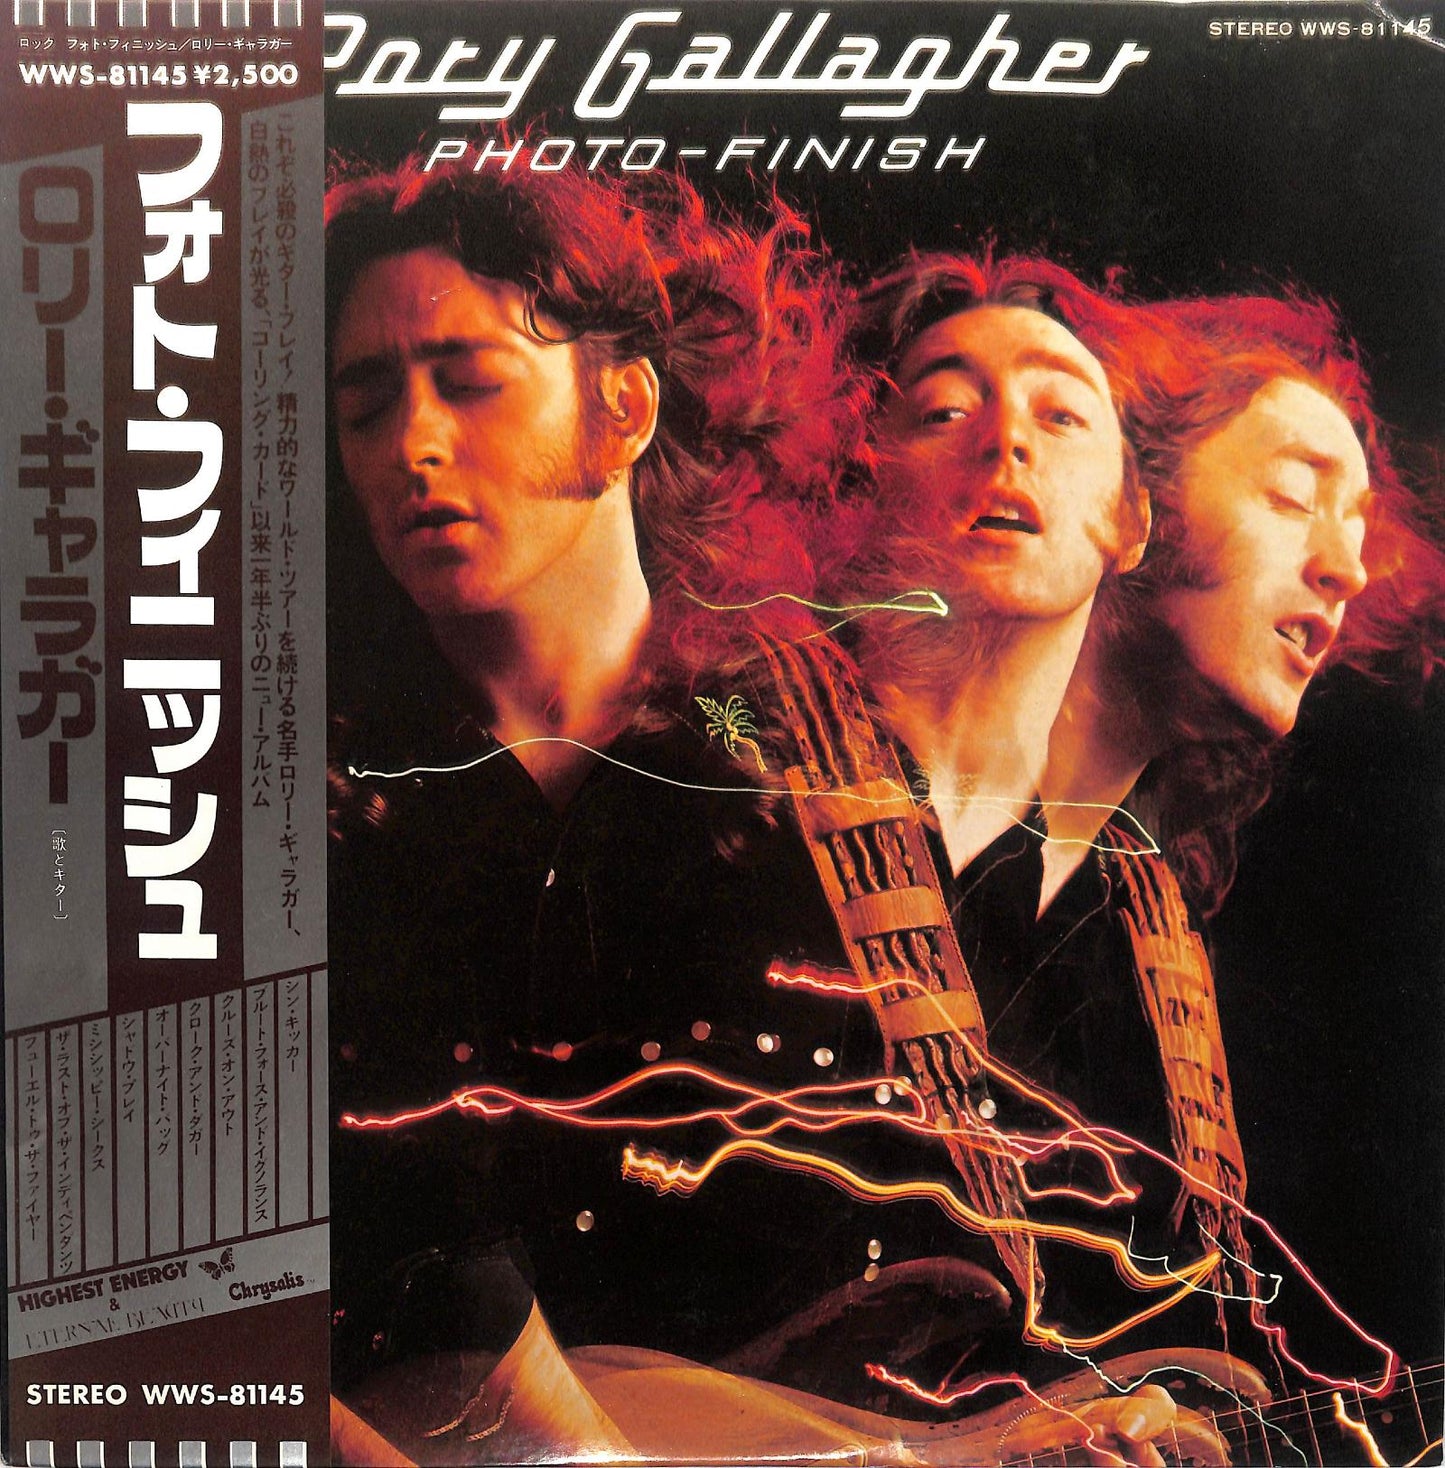 RORY GALLAGHER - Photo-Finish